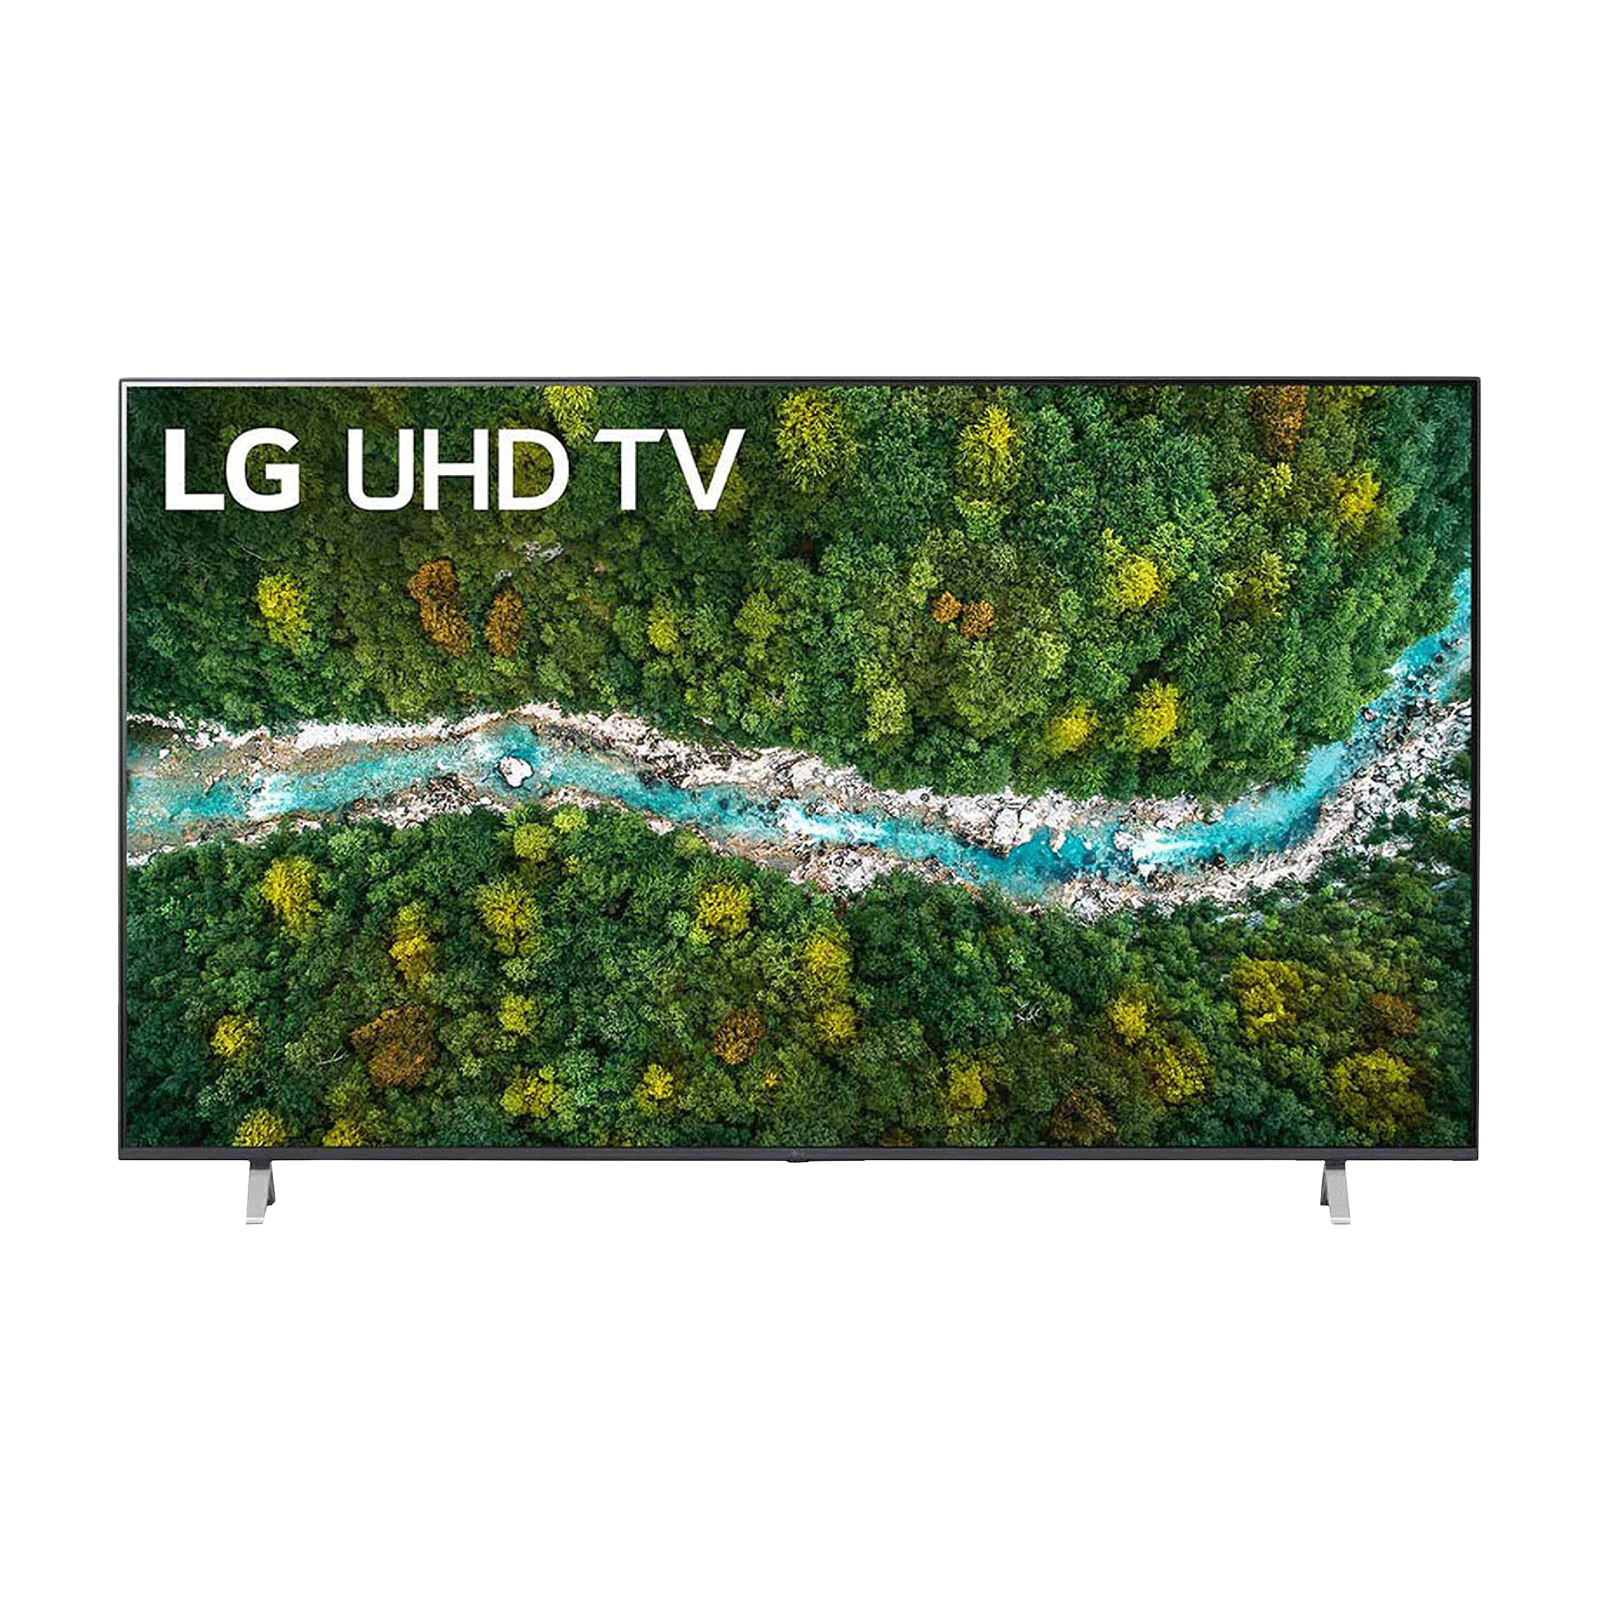 LG UP77 177.8 cm (70 inch) 4K Ultra HD LED WebOS TV with Alexa Compatibility